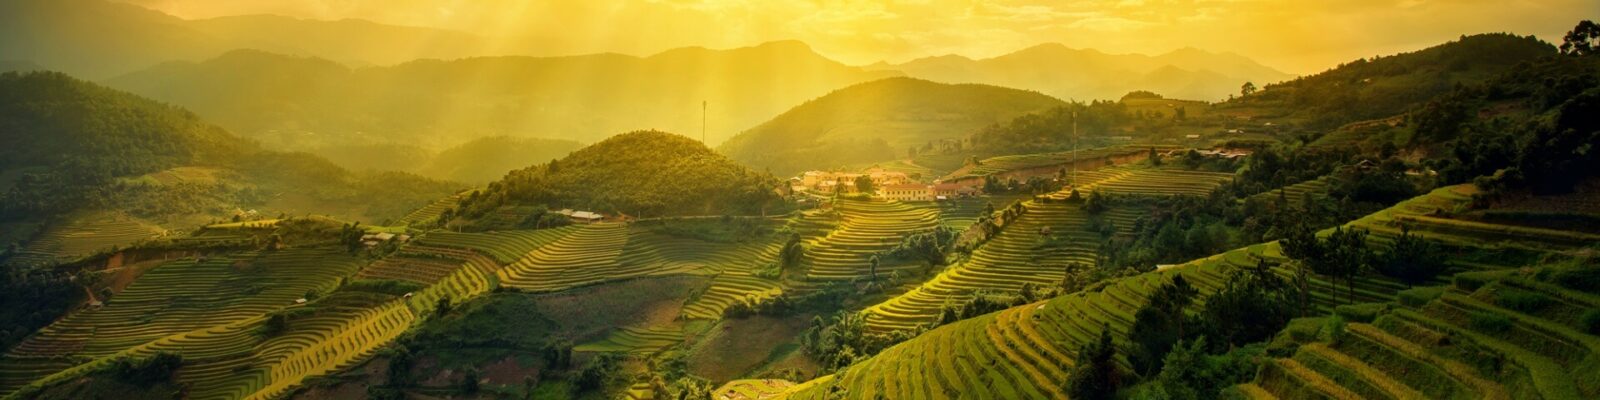 Discover More of Vietnam With a Trip to Sapa